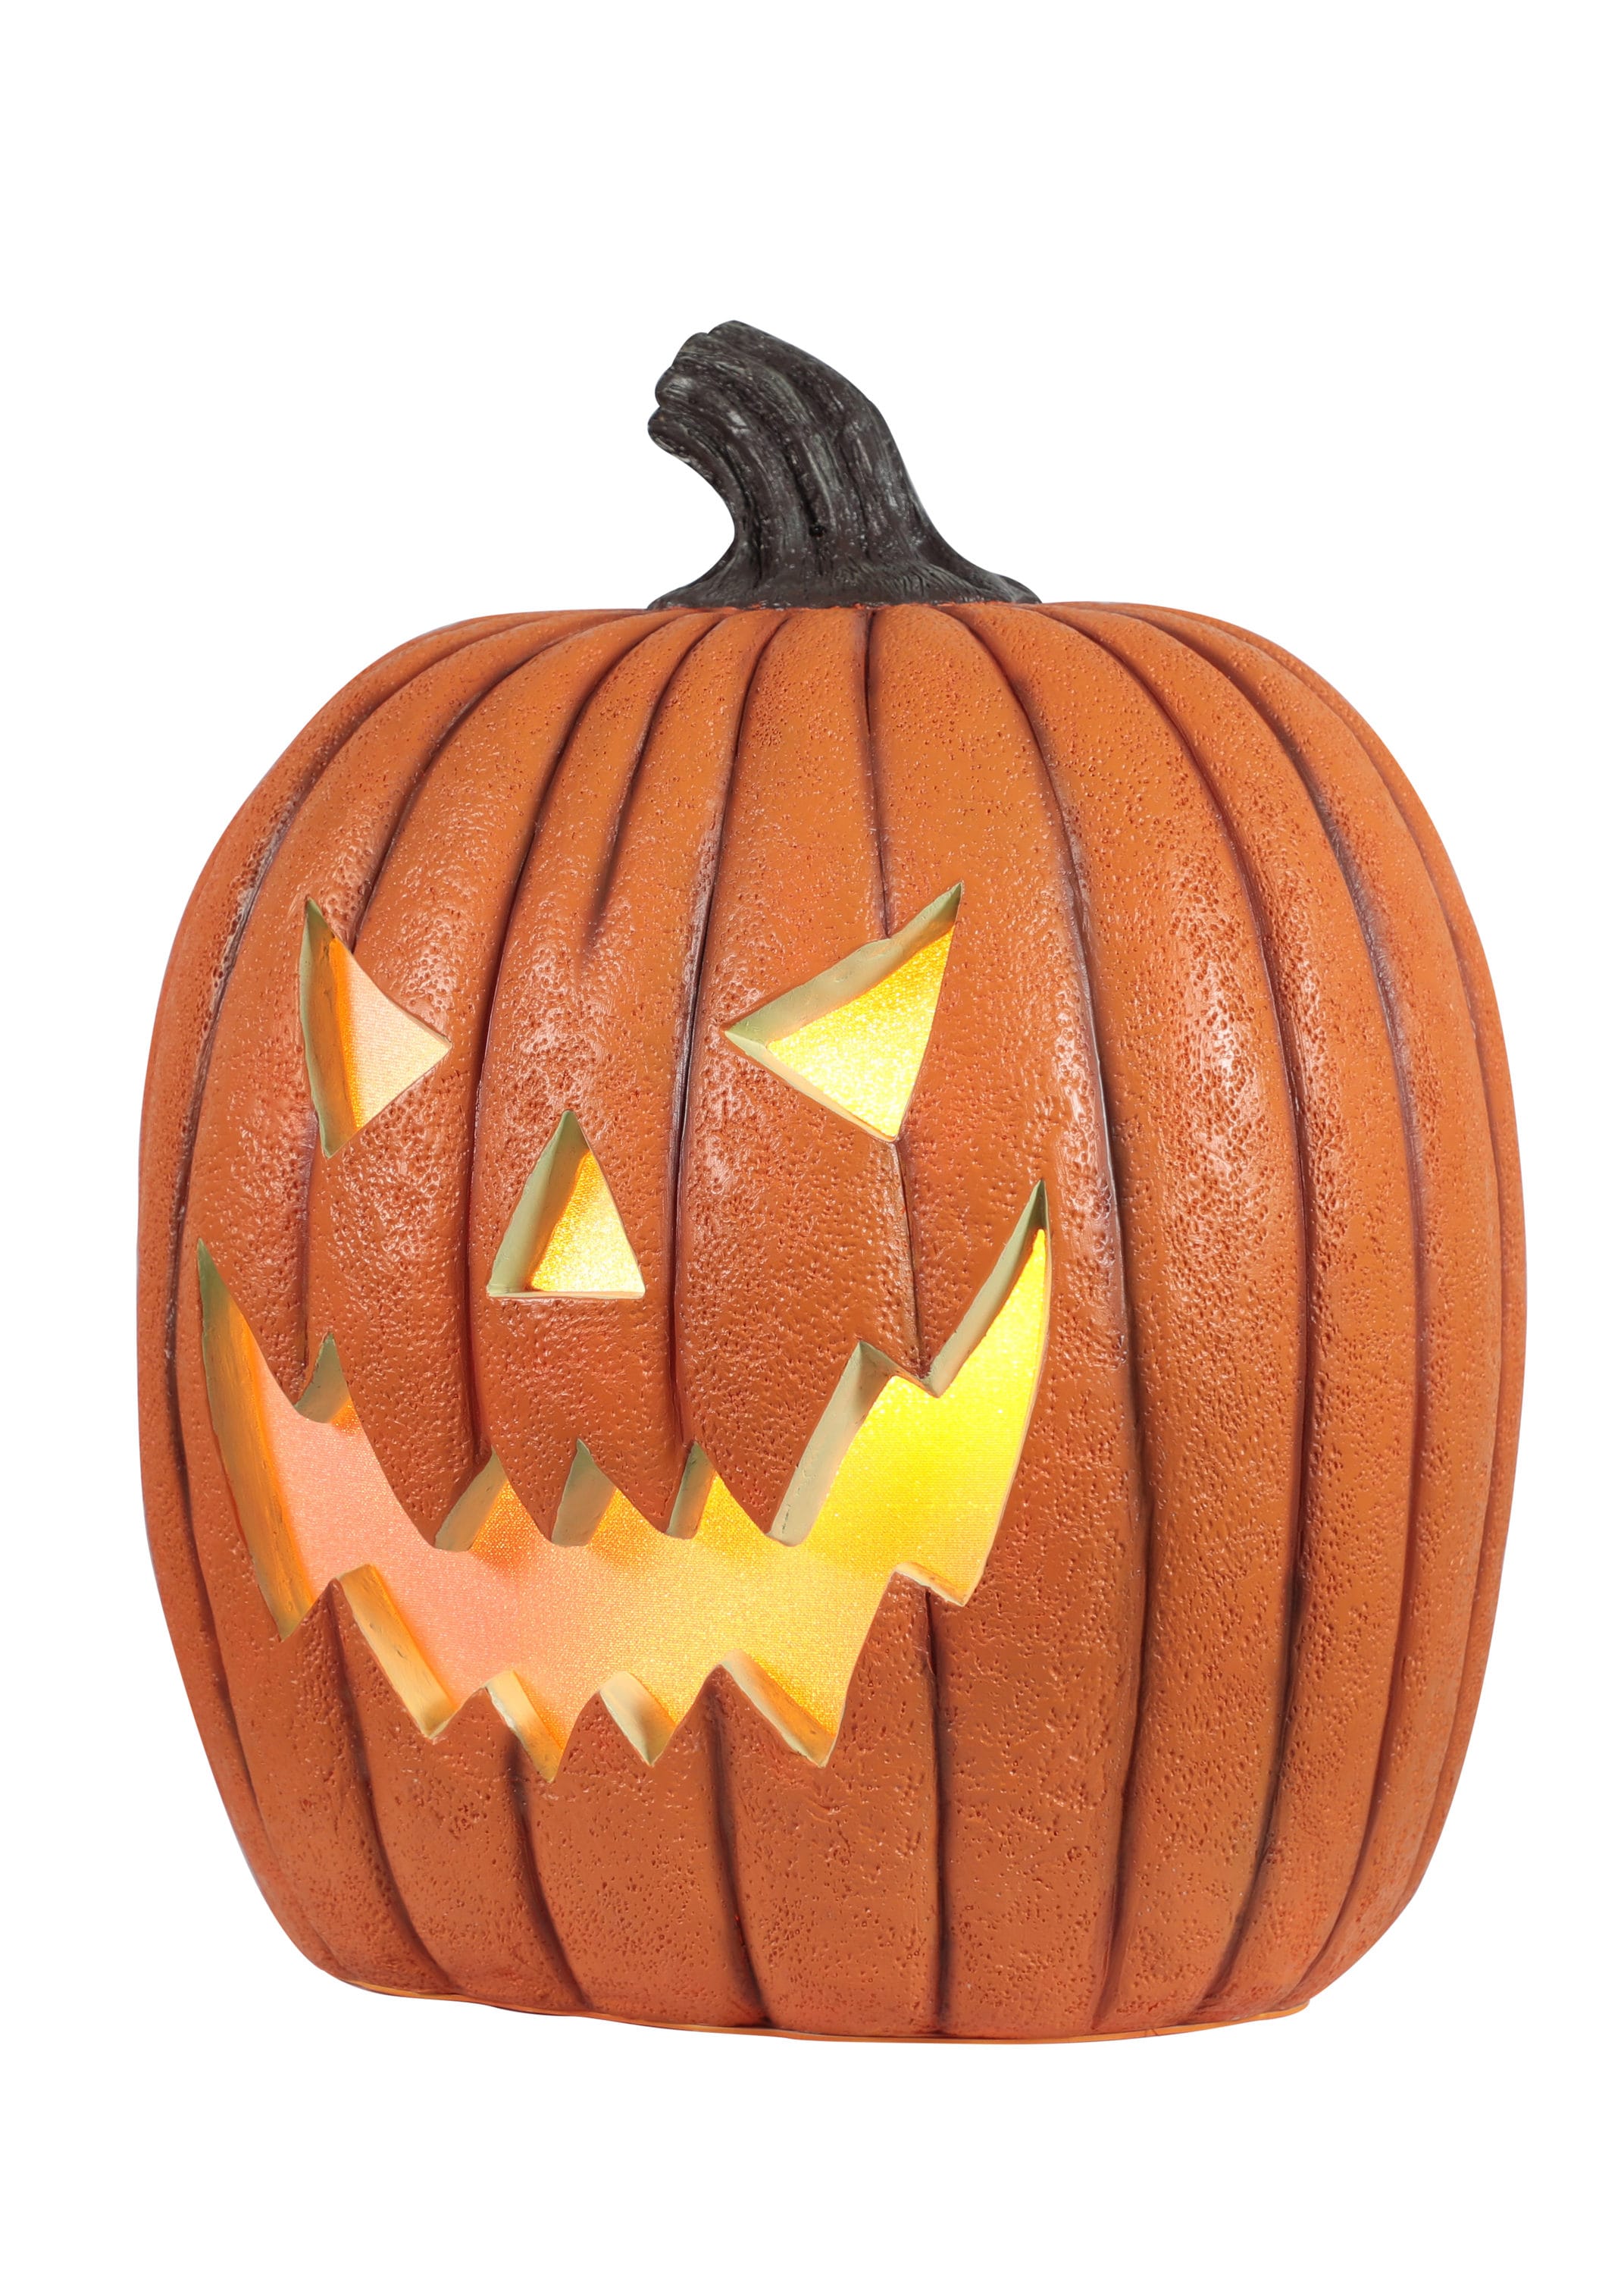 Holiday Living 21-in Lighted Jack-o-lantern Figurine at Lowes.com